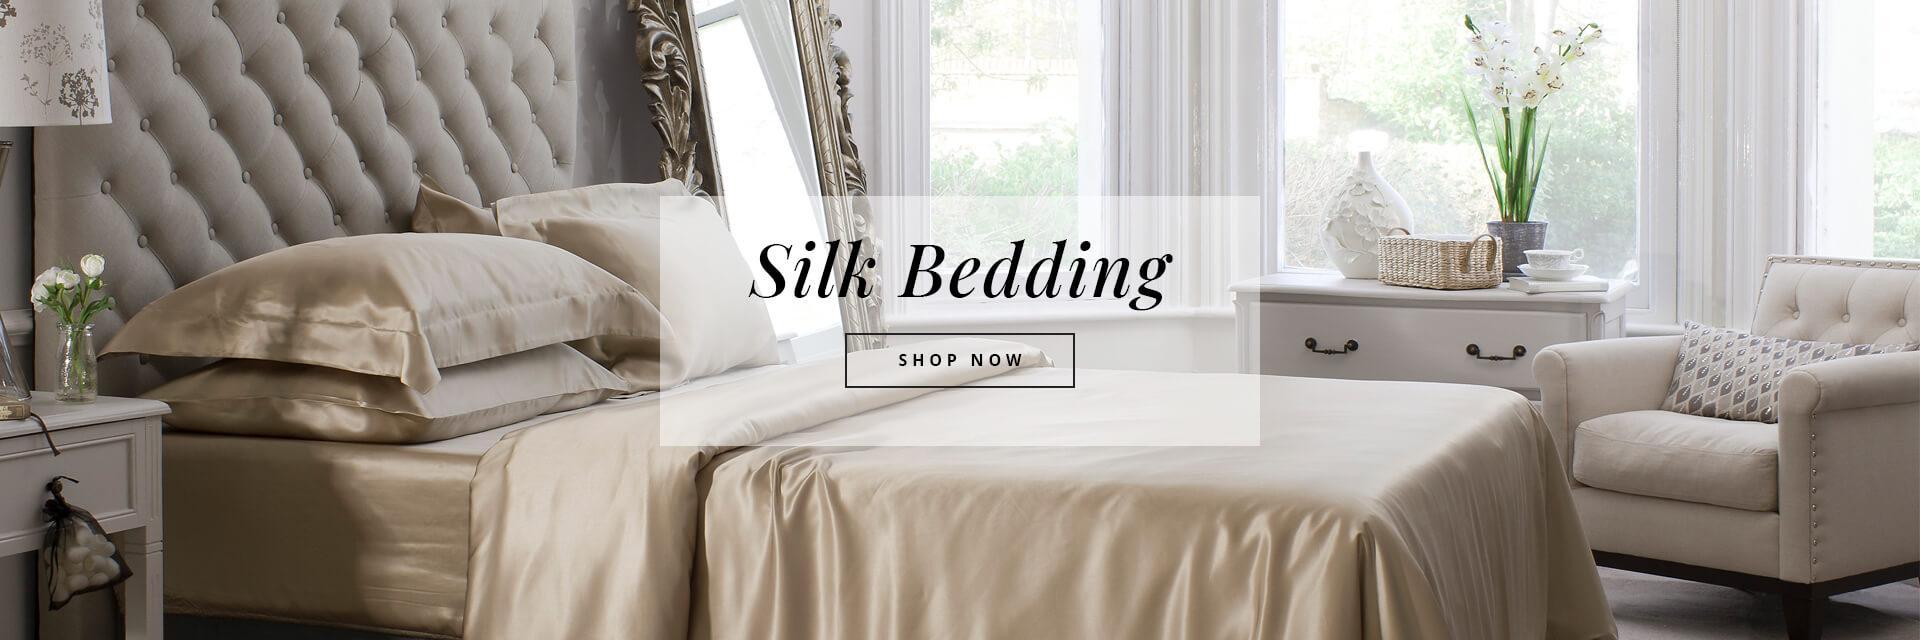 Bed with silk bedding